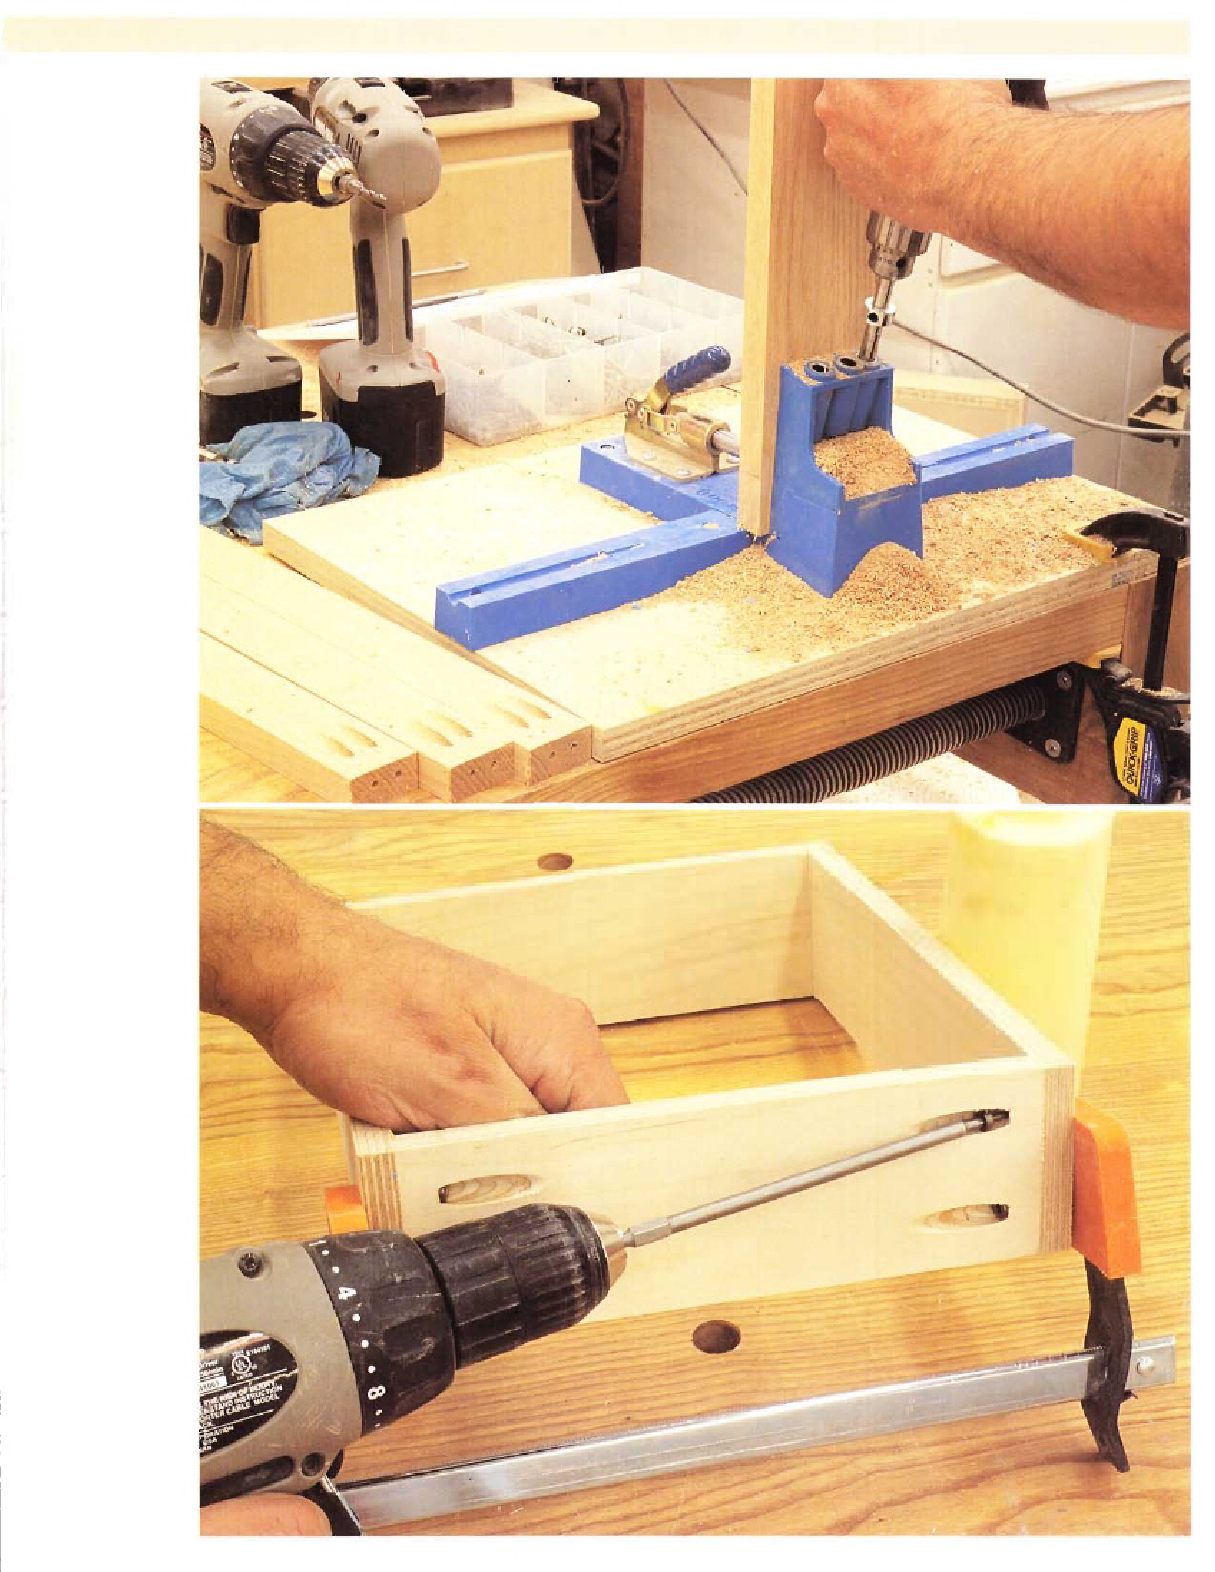 Pocket Hole Drilling Jig - Project Book